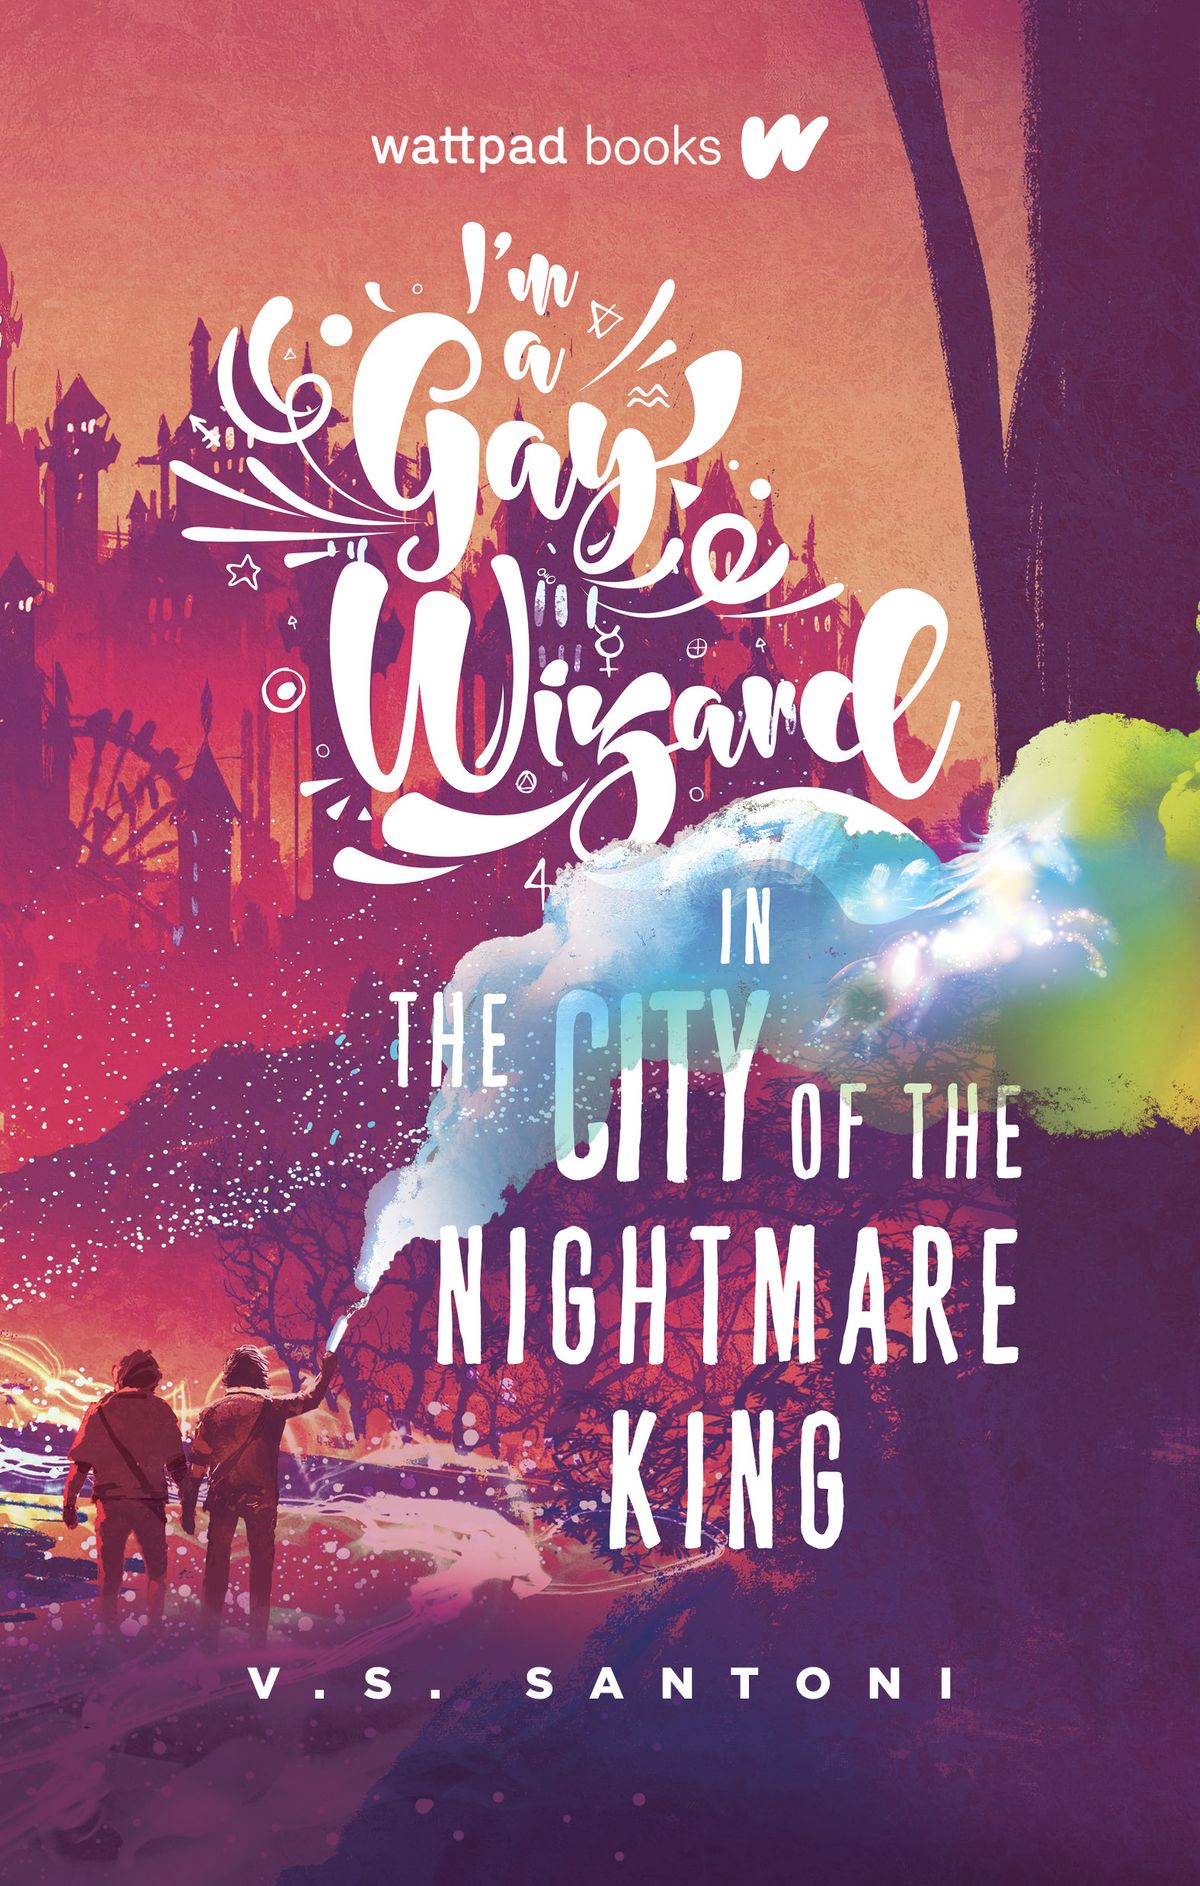 “I’m a Gay Wizard in the City of the Nightmare King” by V.S. Santoni  (Courtesy)